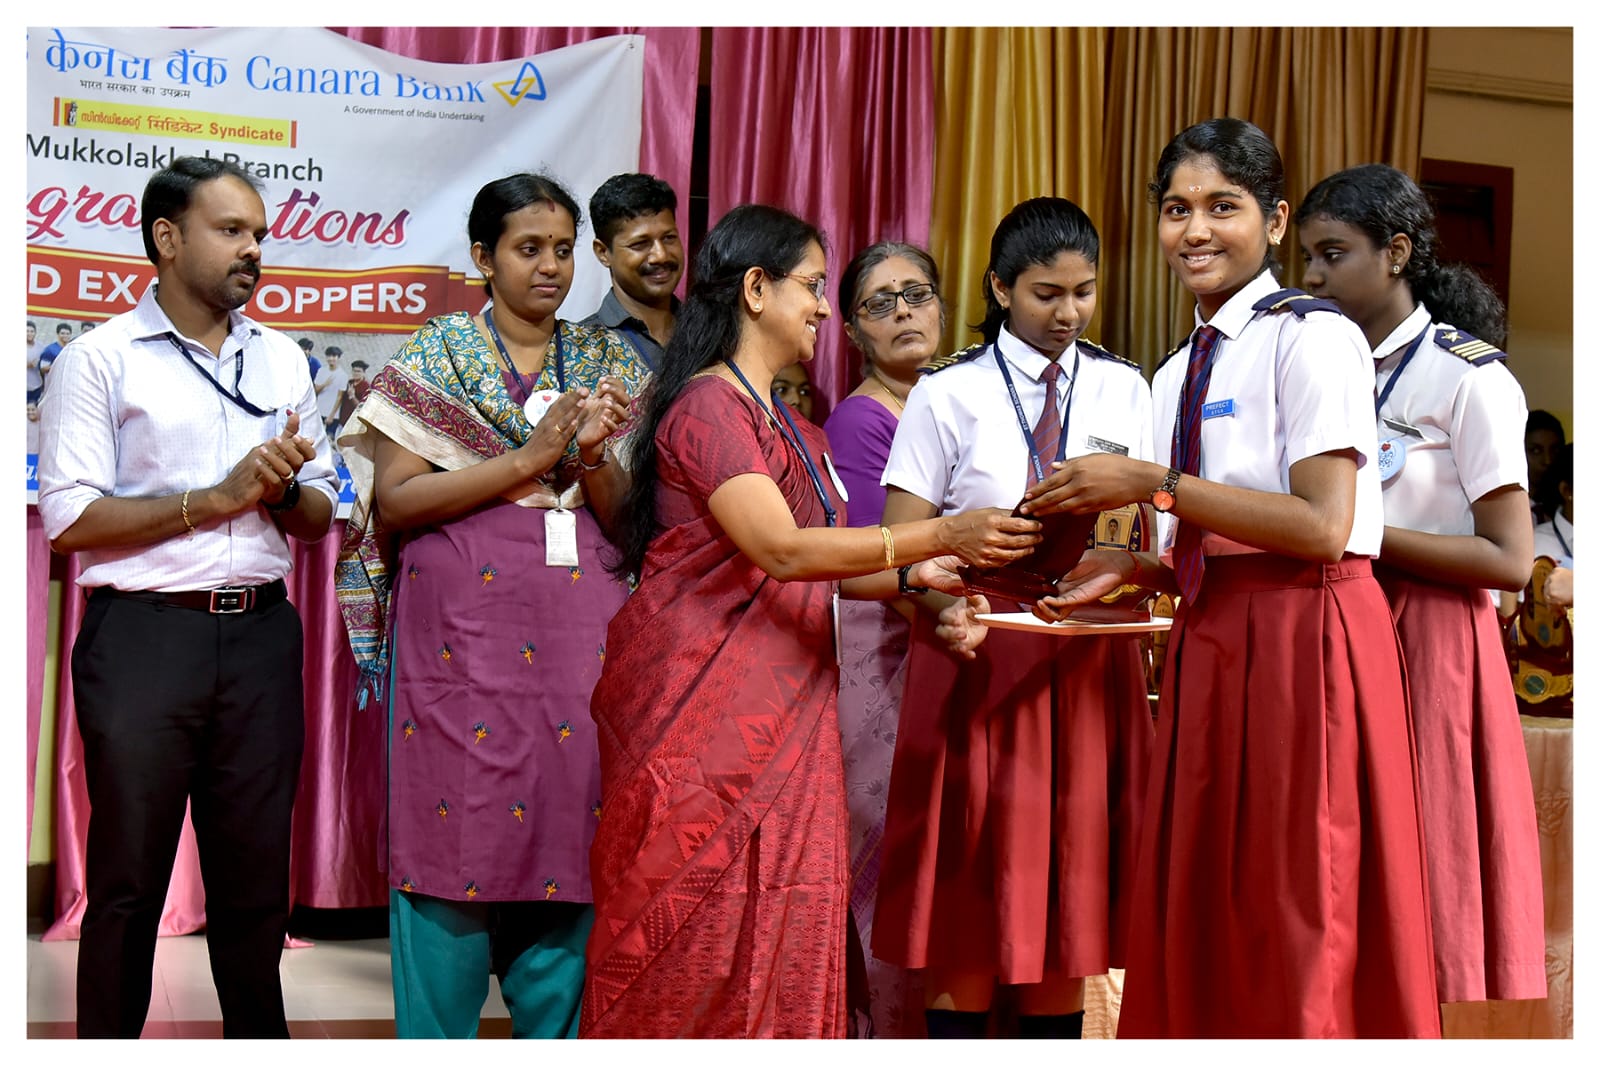 Award ceremony of our Top Achievers given by Canara Bank, Mukkolakkal